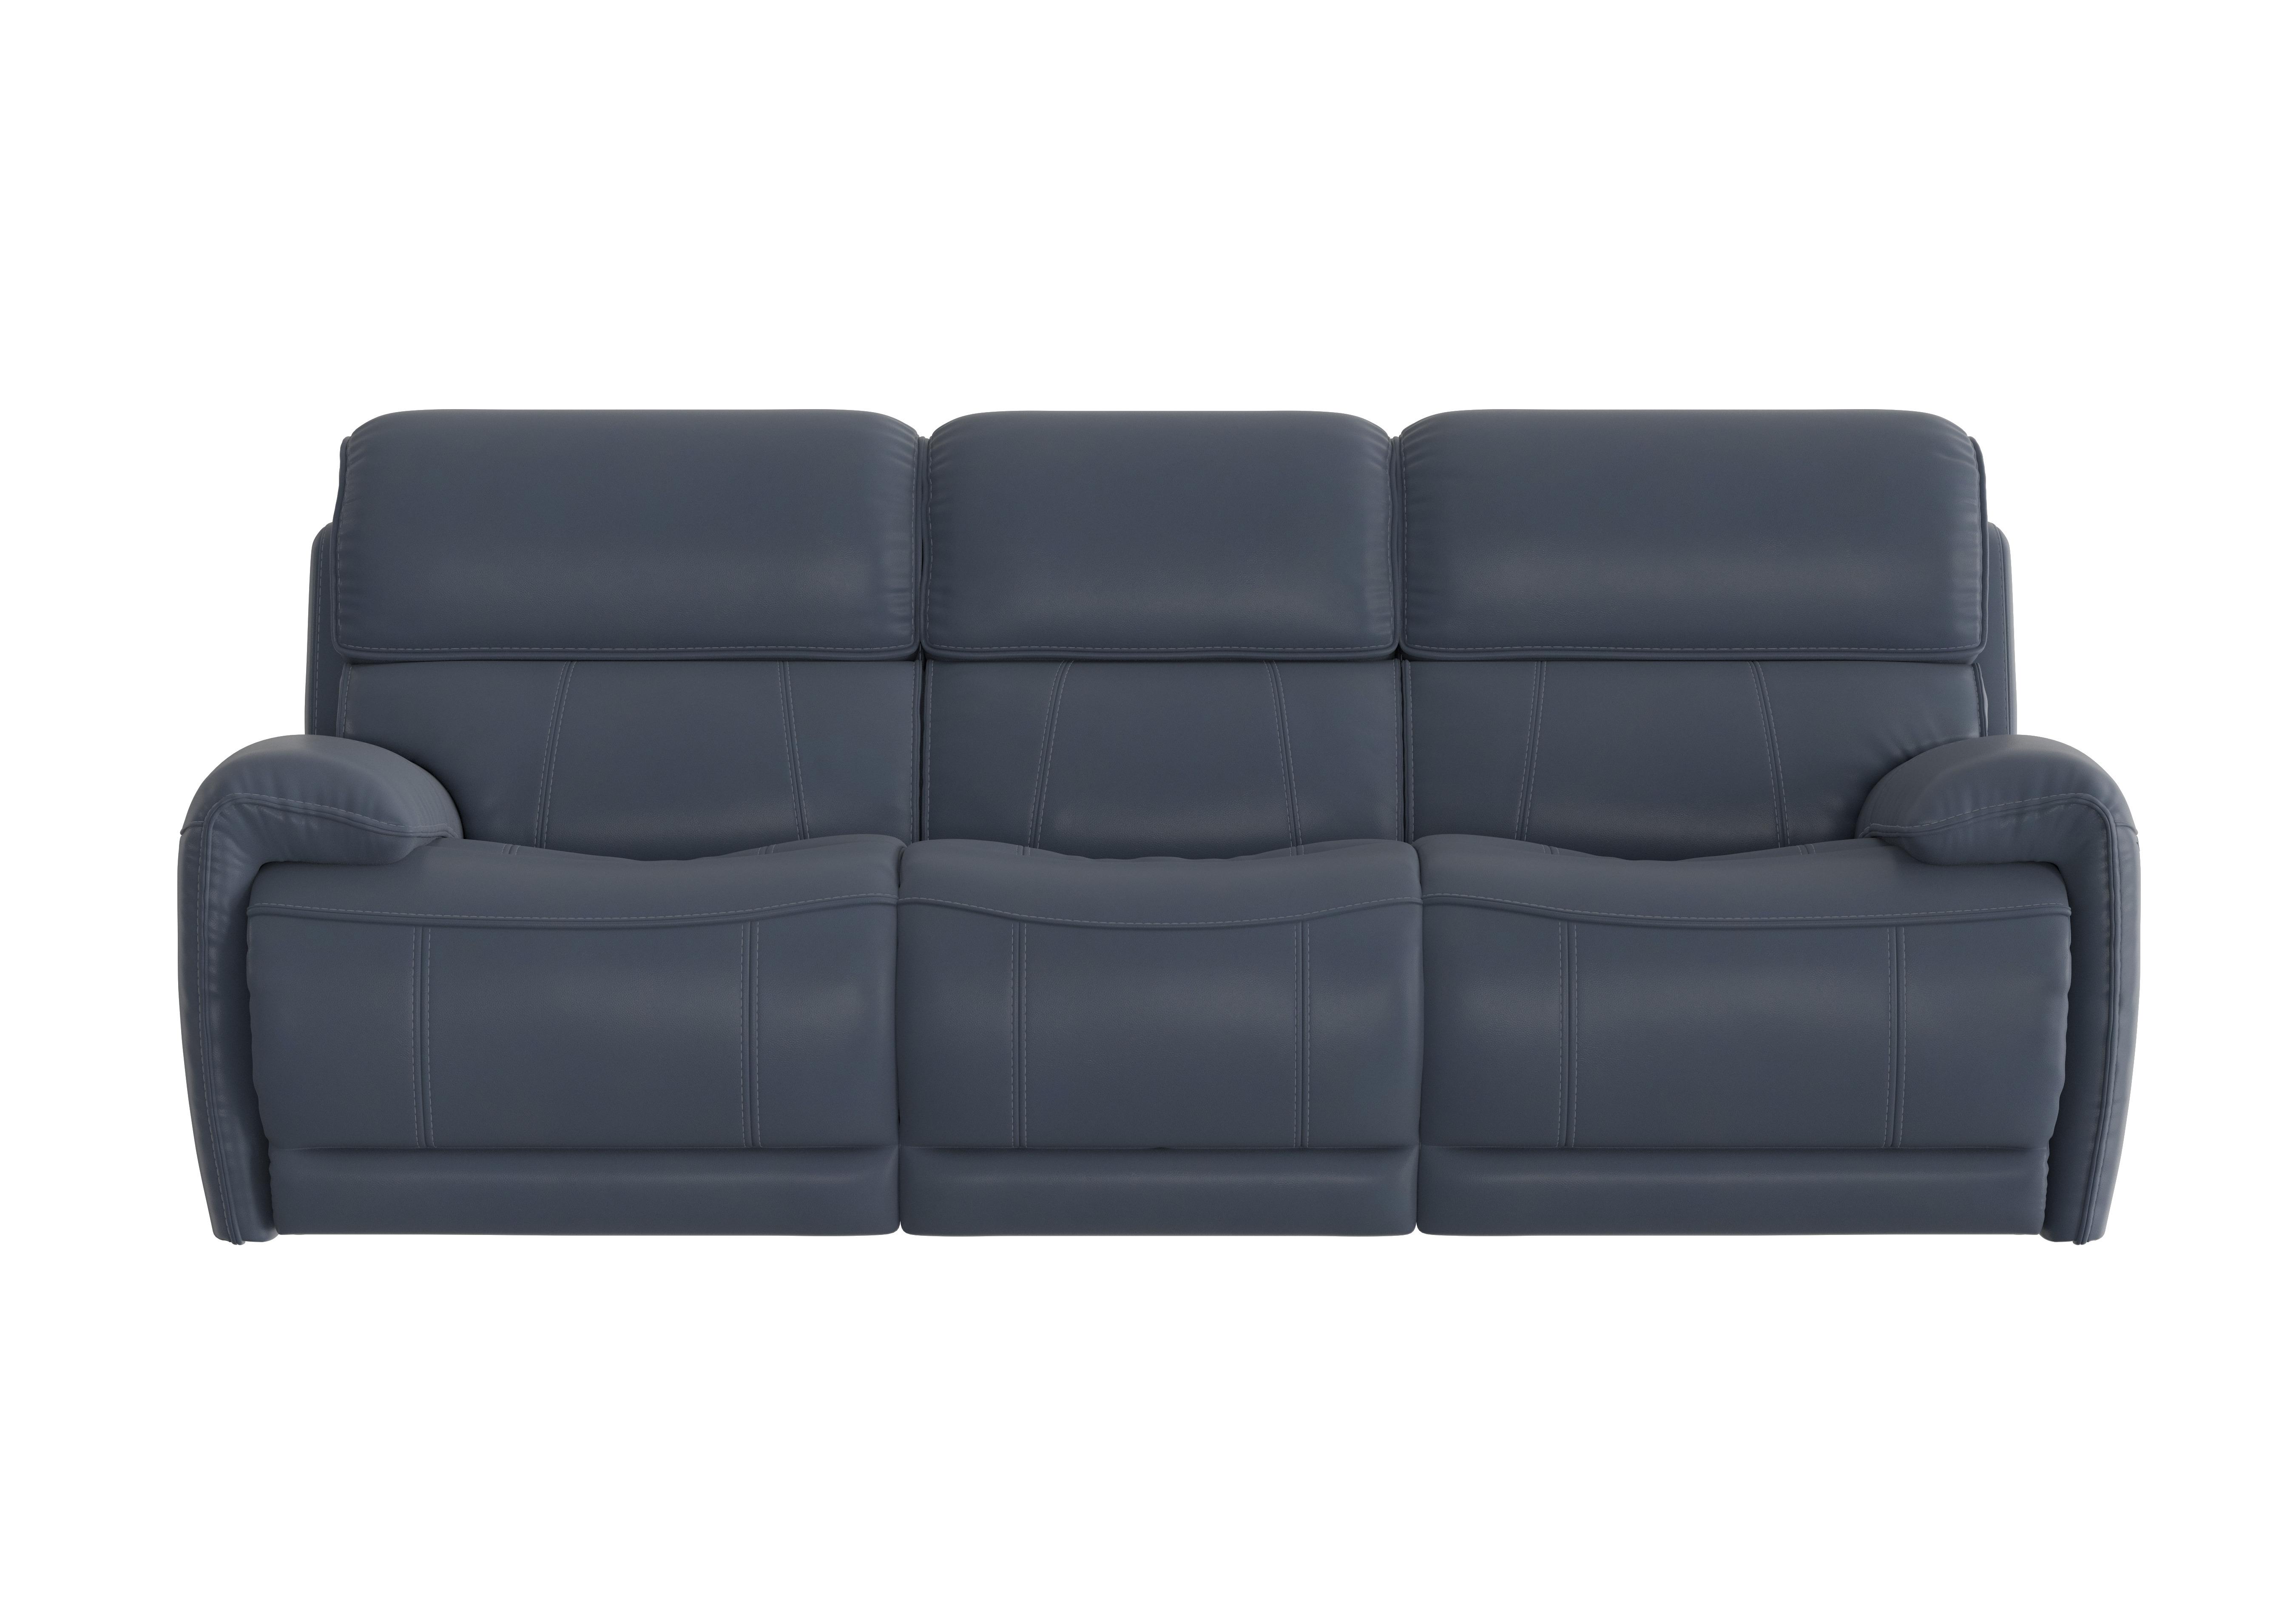 Link 3 Seater Leather Power Recliner Sofa with Power Headrests in Bv-313e Ocean Blue on Furniture Village